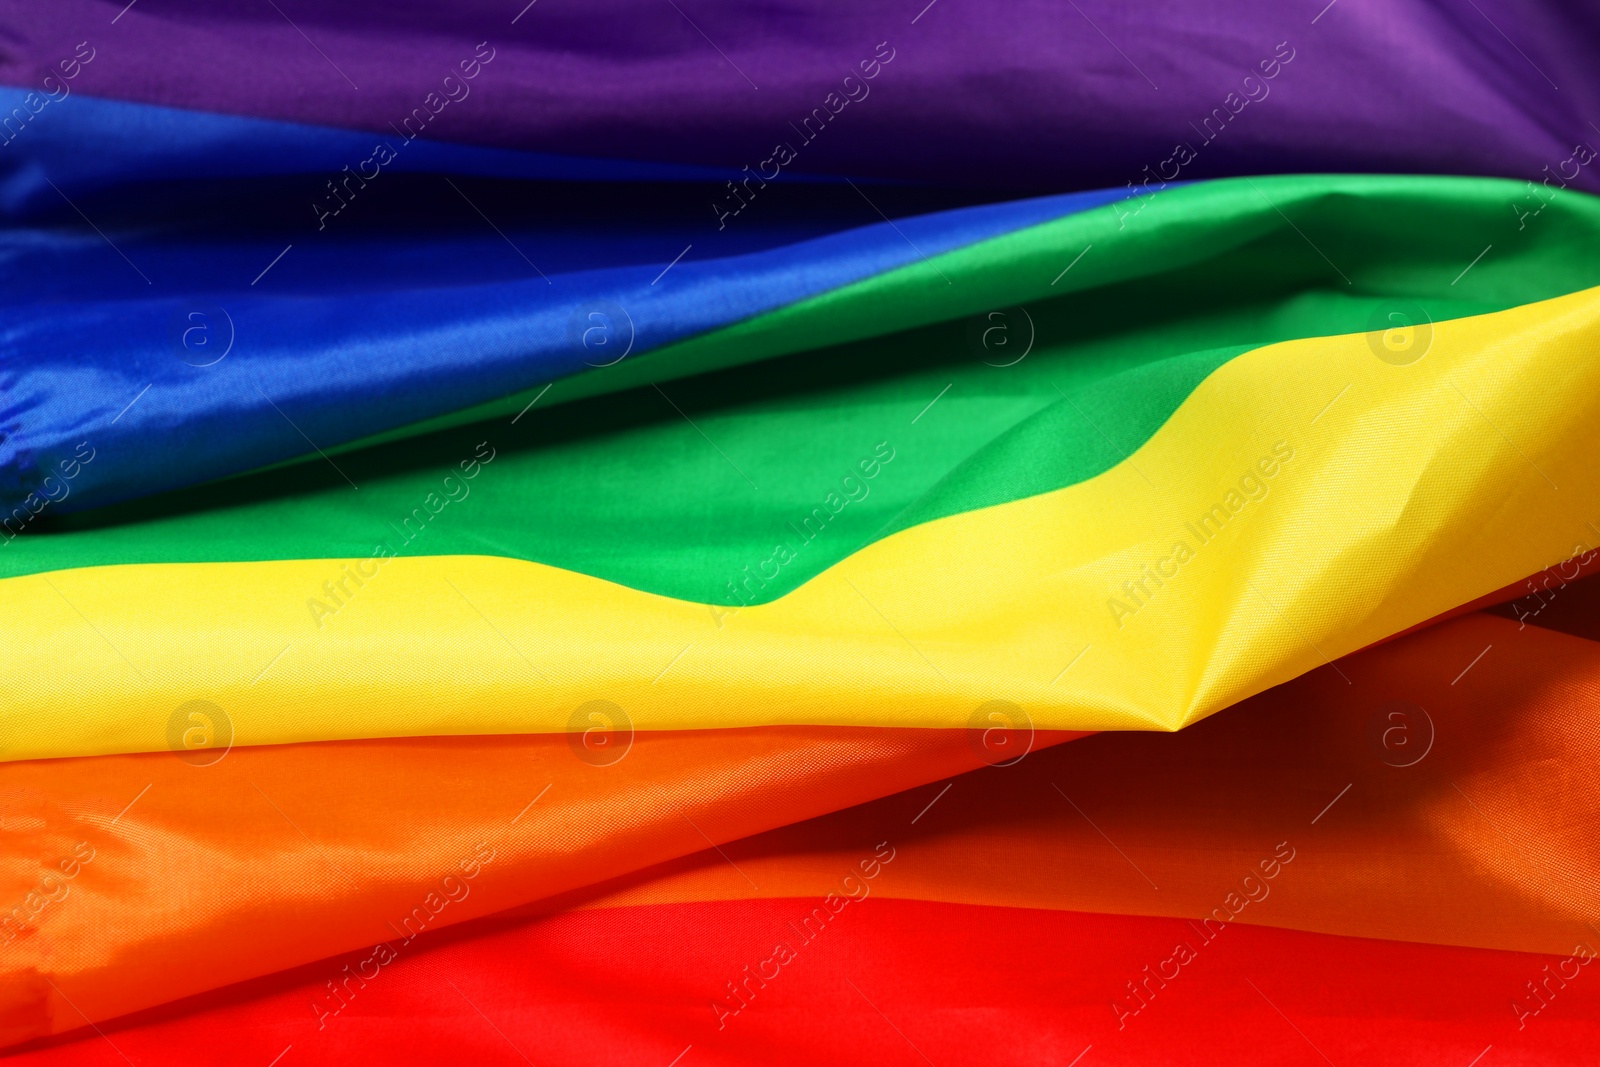 Photo of Rainbow LGBT flag as background, closeup view